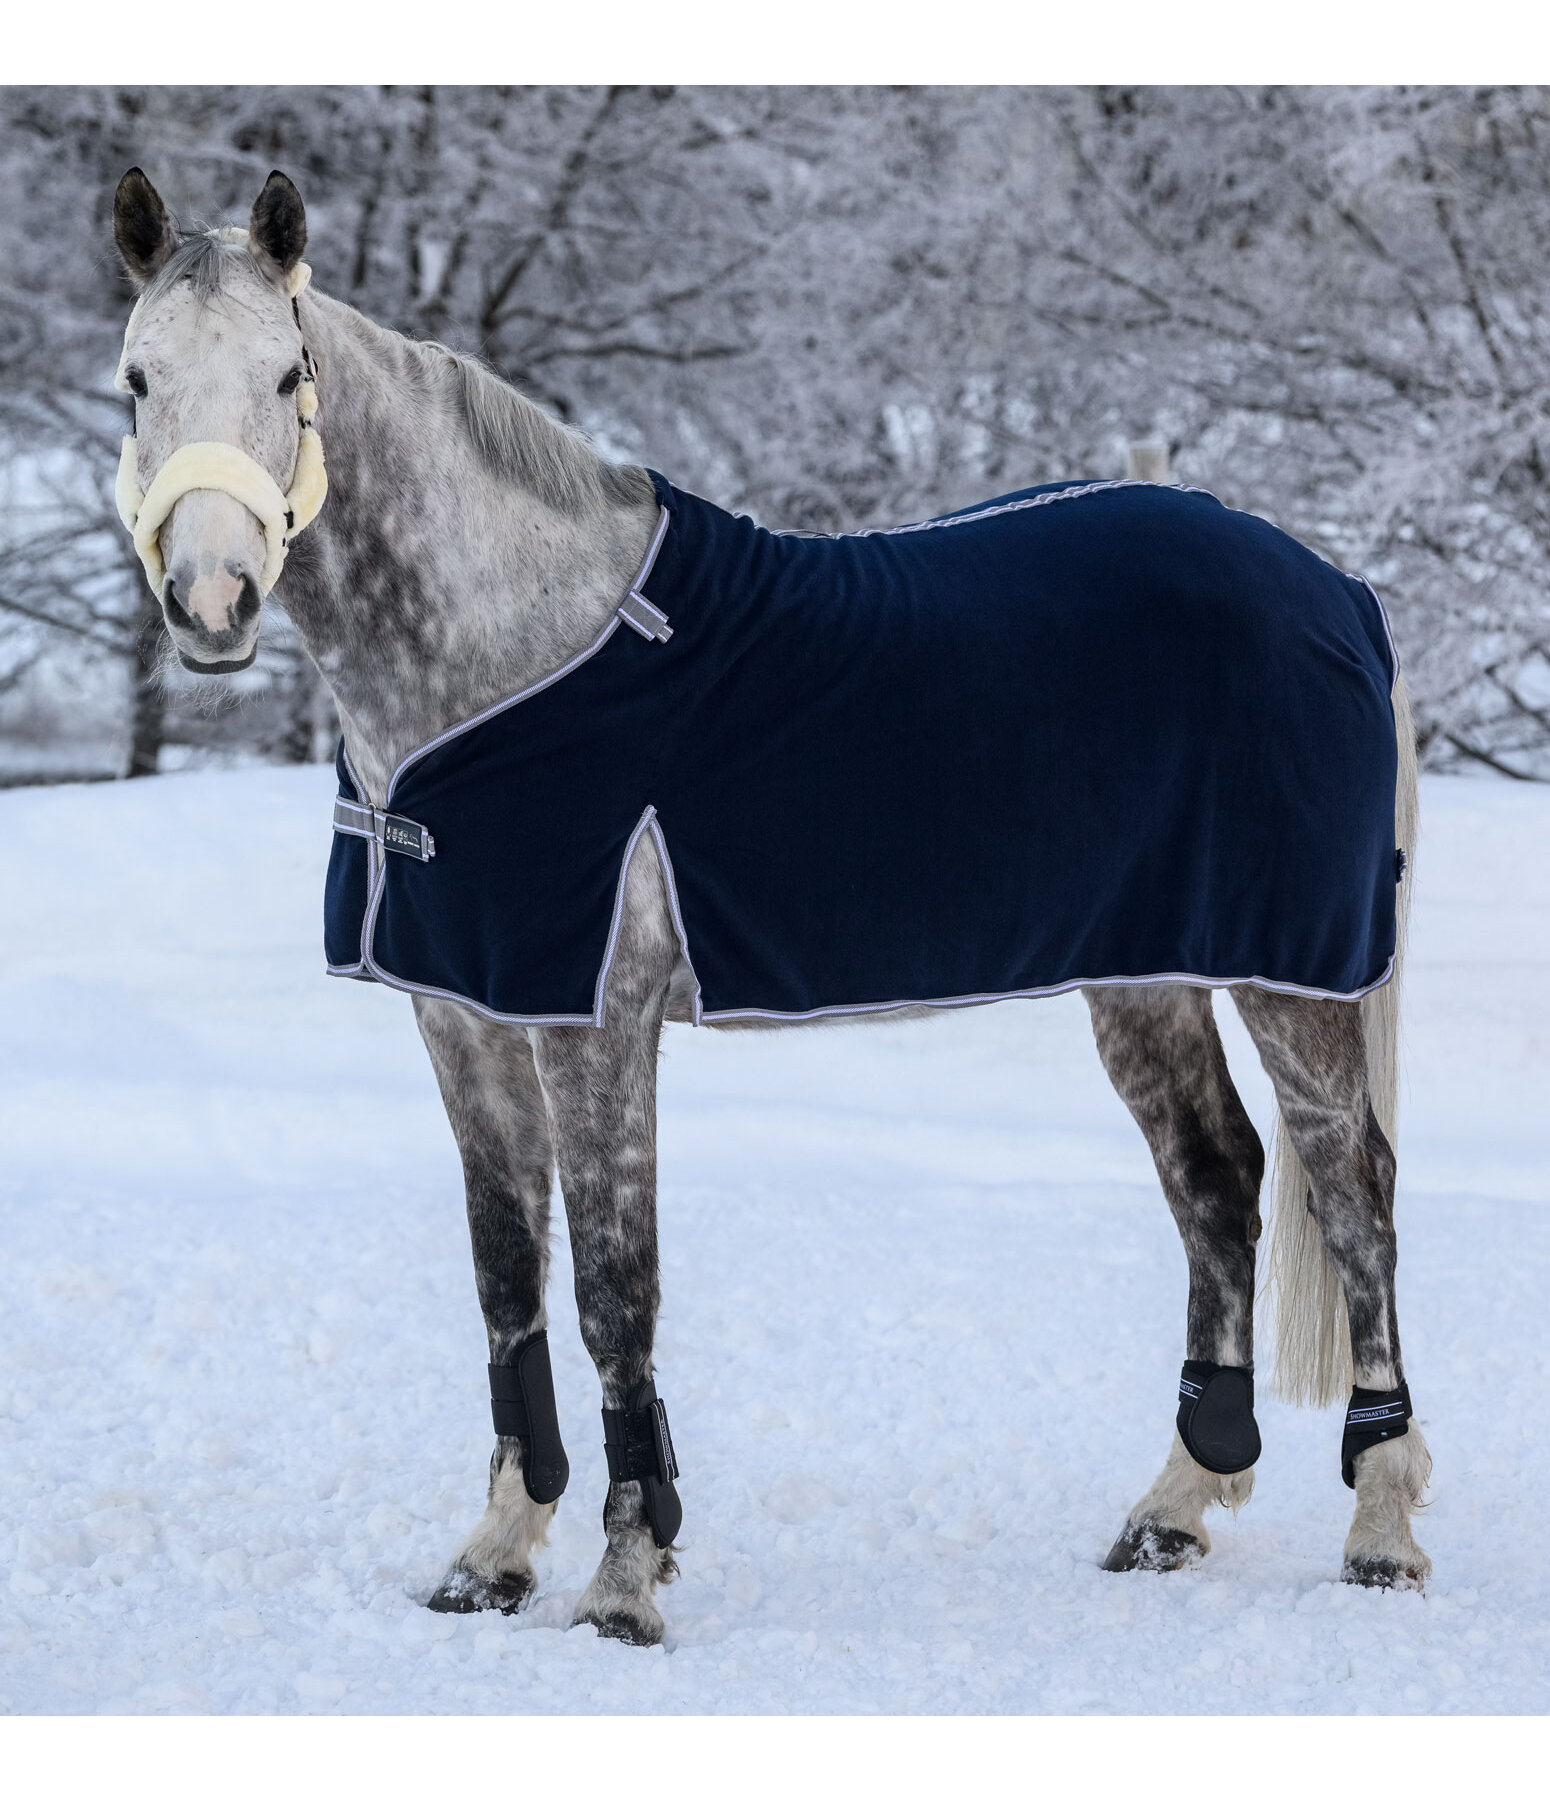 Combination System Fleece Inner Rug for Turnout Rug Janice